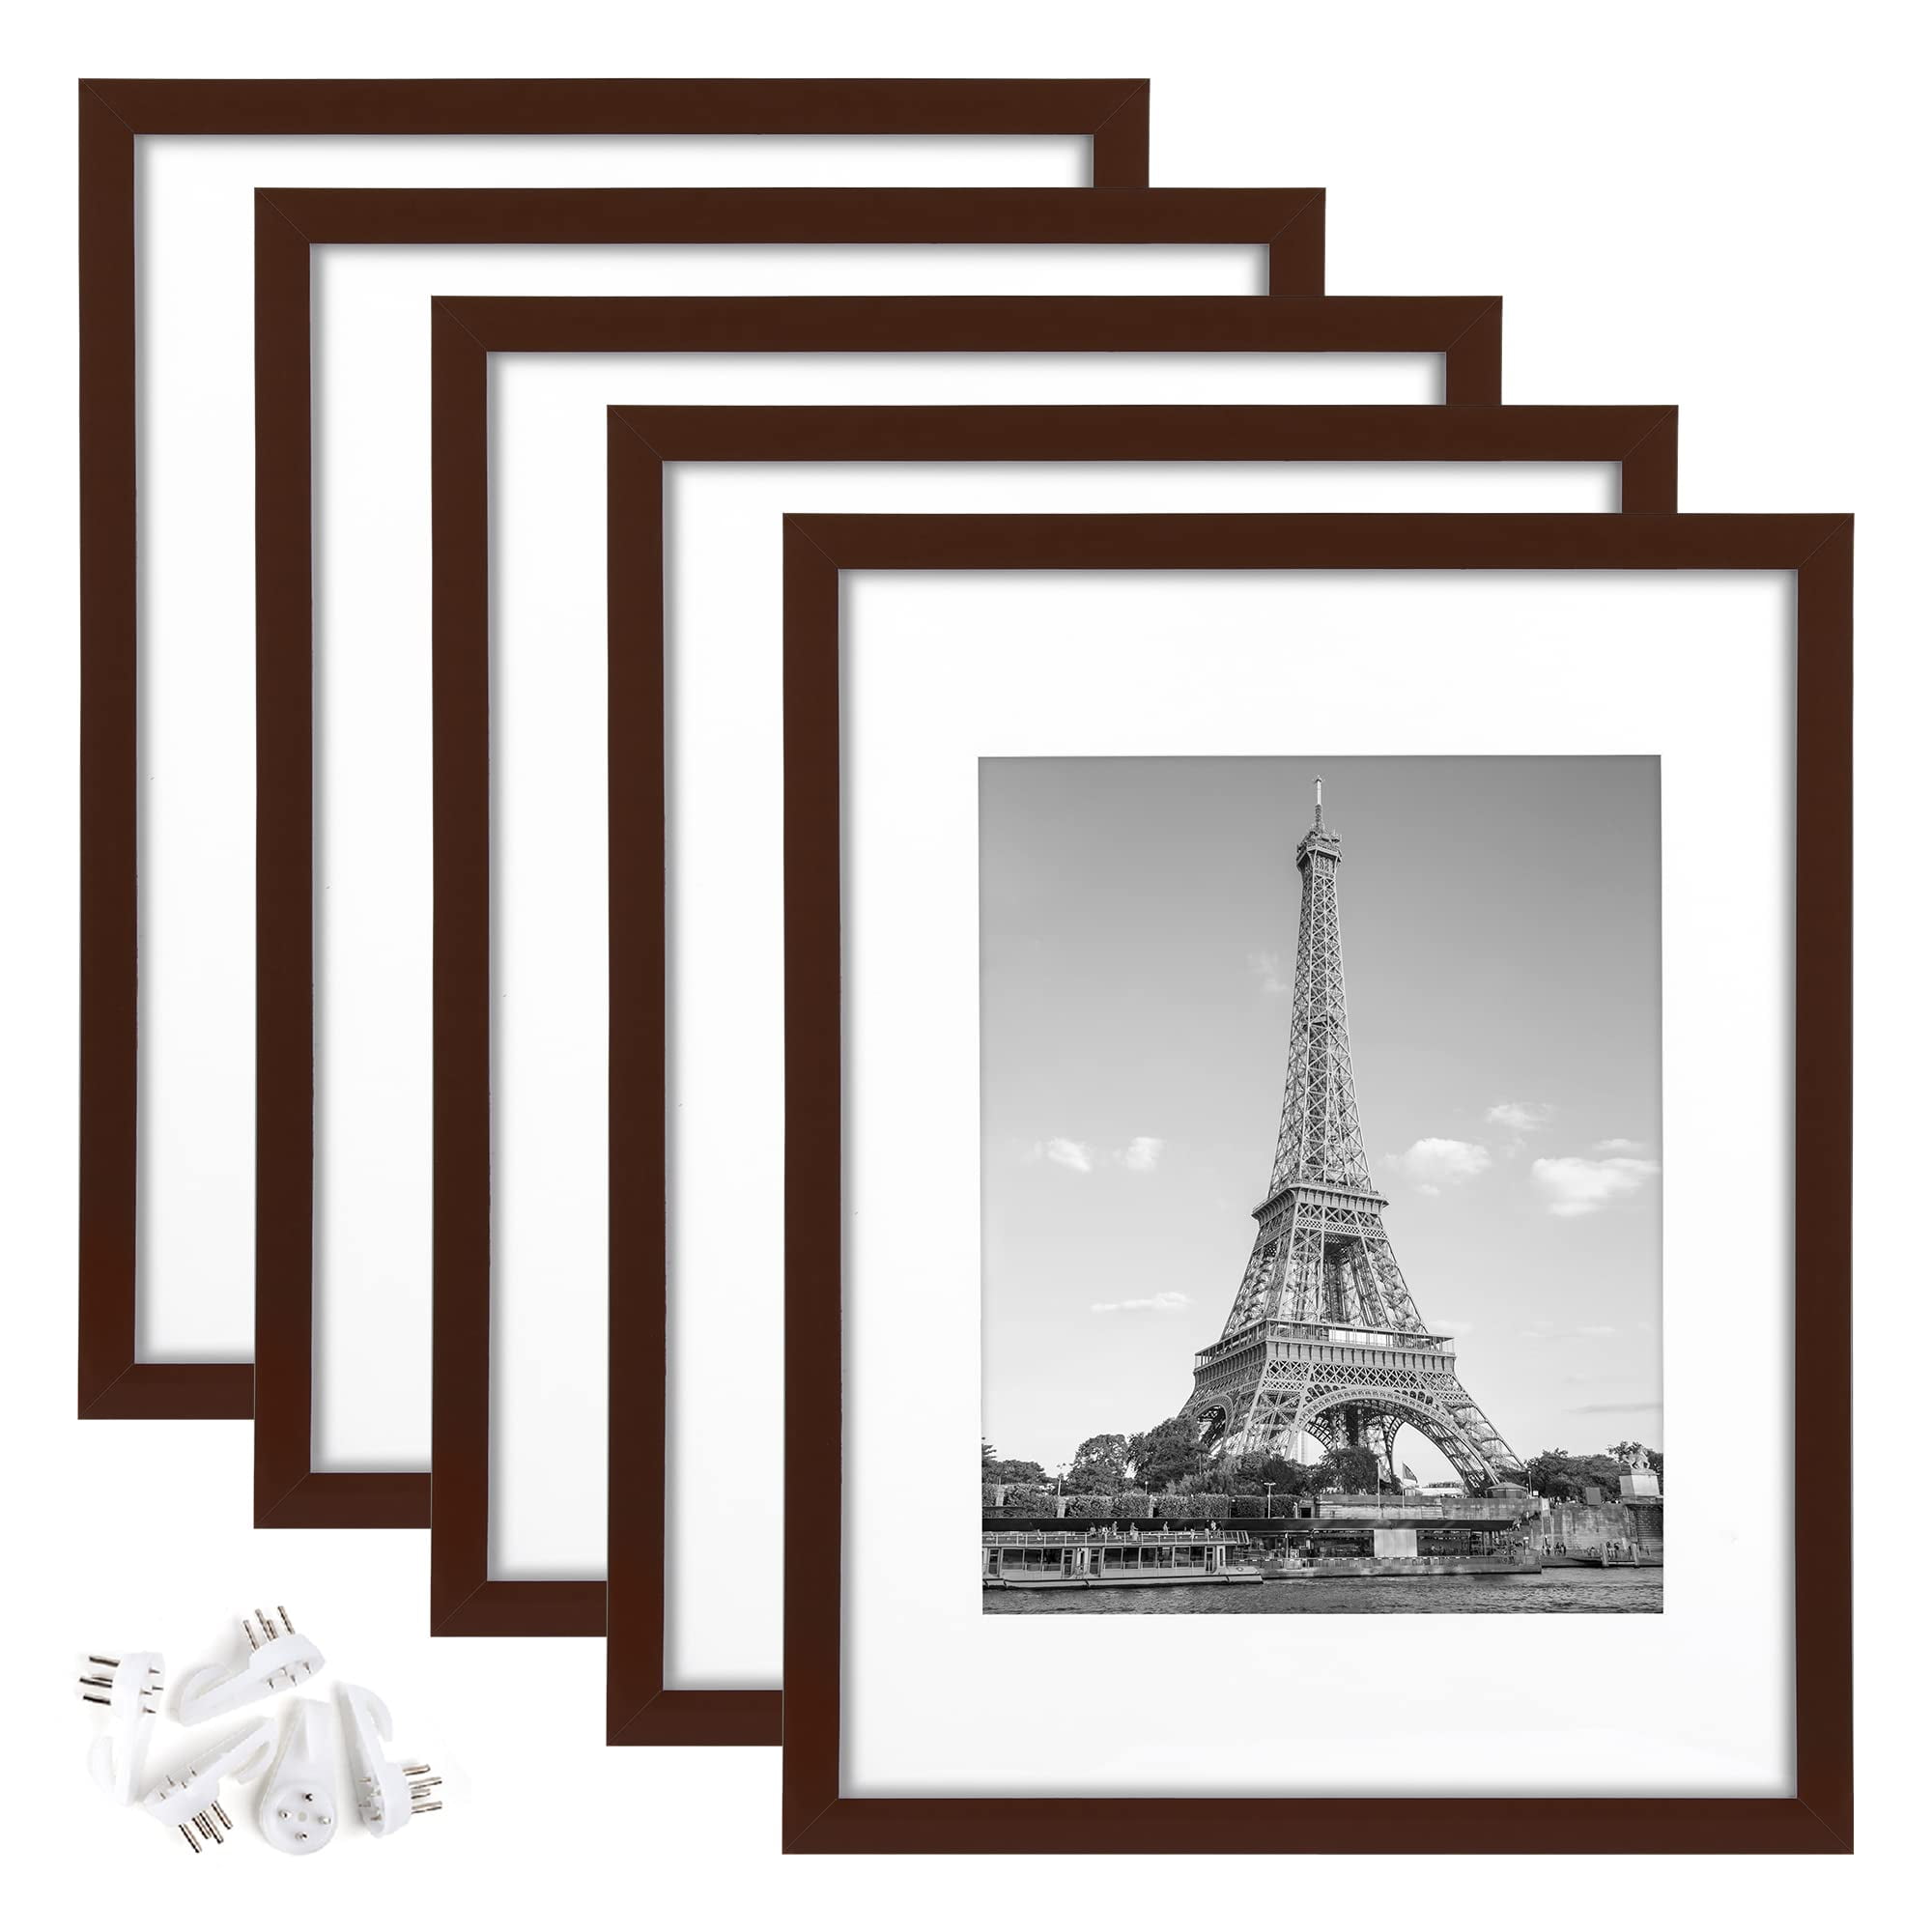 Art Emotion 16x20 Picture Frame | 16x20 Frame Matted to 11x14 |16x20 Poster Frame, 11x14 Opening | 16 x 20 Frame Picture, 16x20 Wood Frame, 11x14